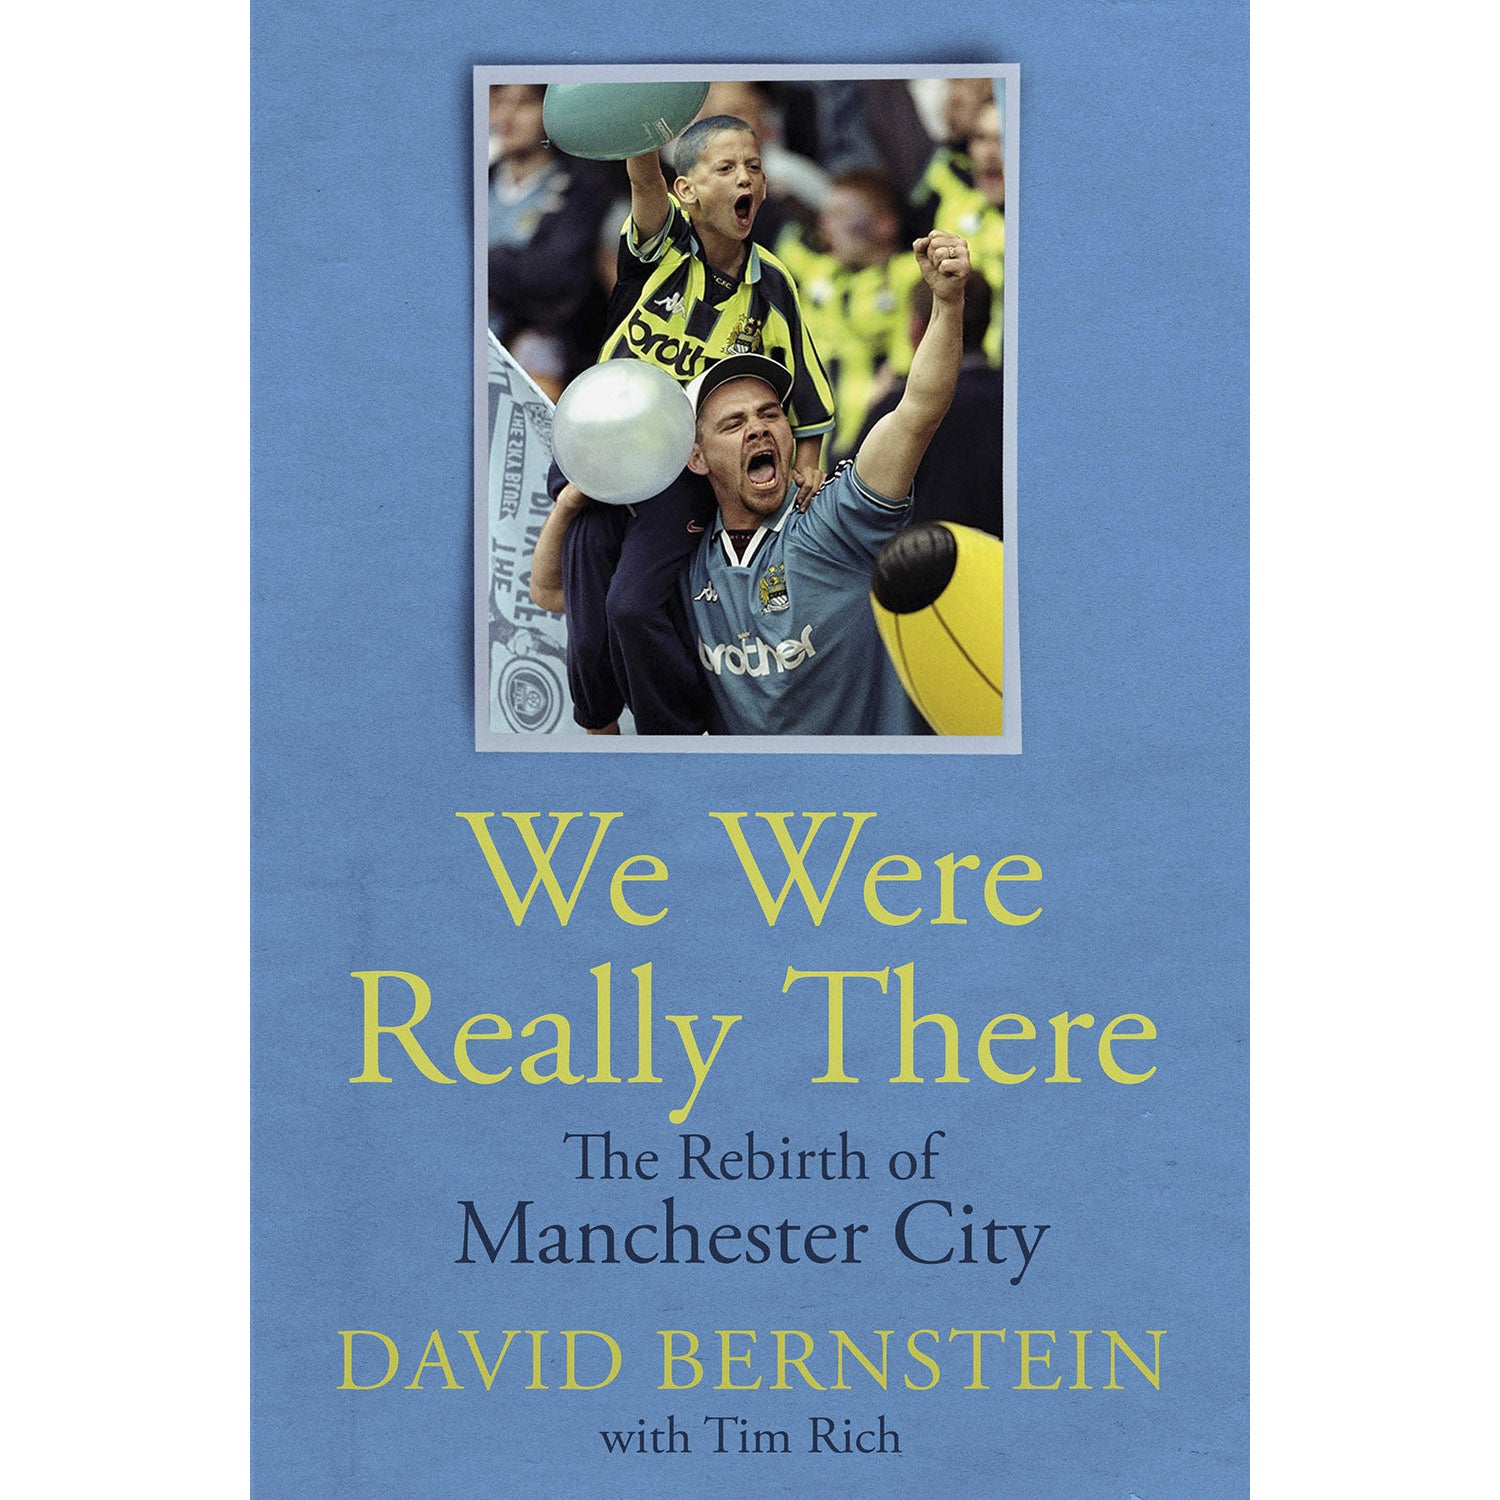 We Were Really There – The Rebirth of Manchester City